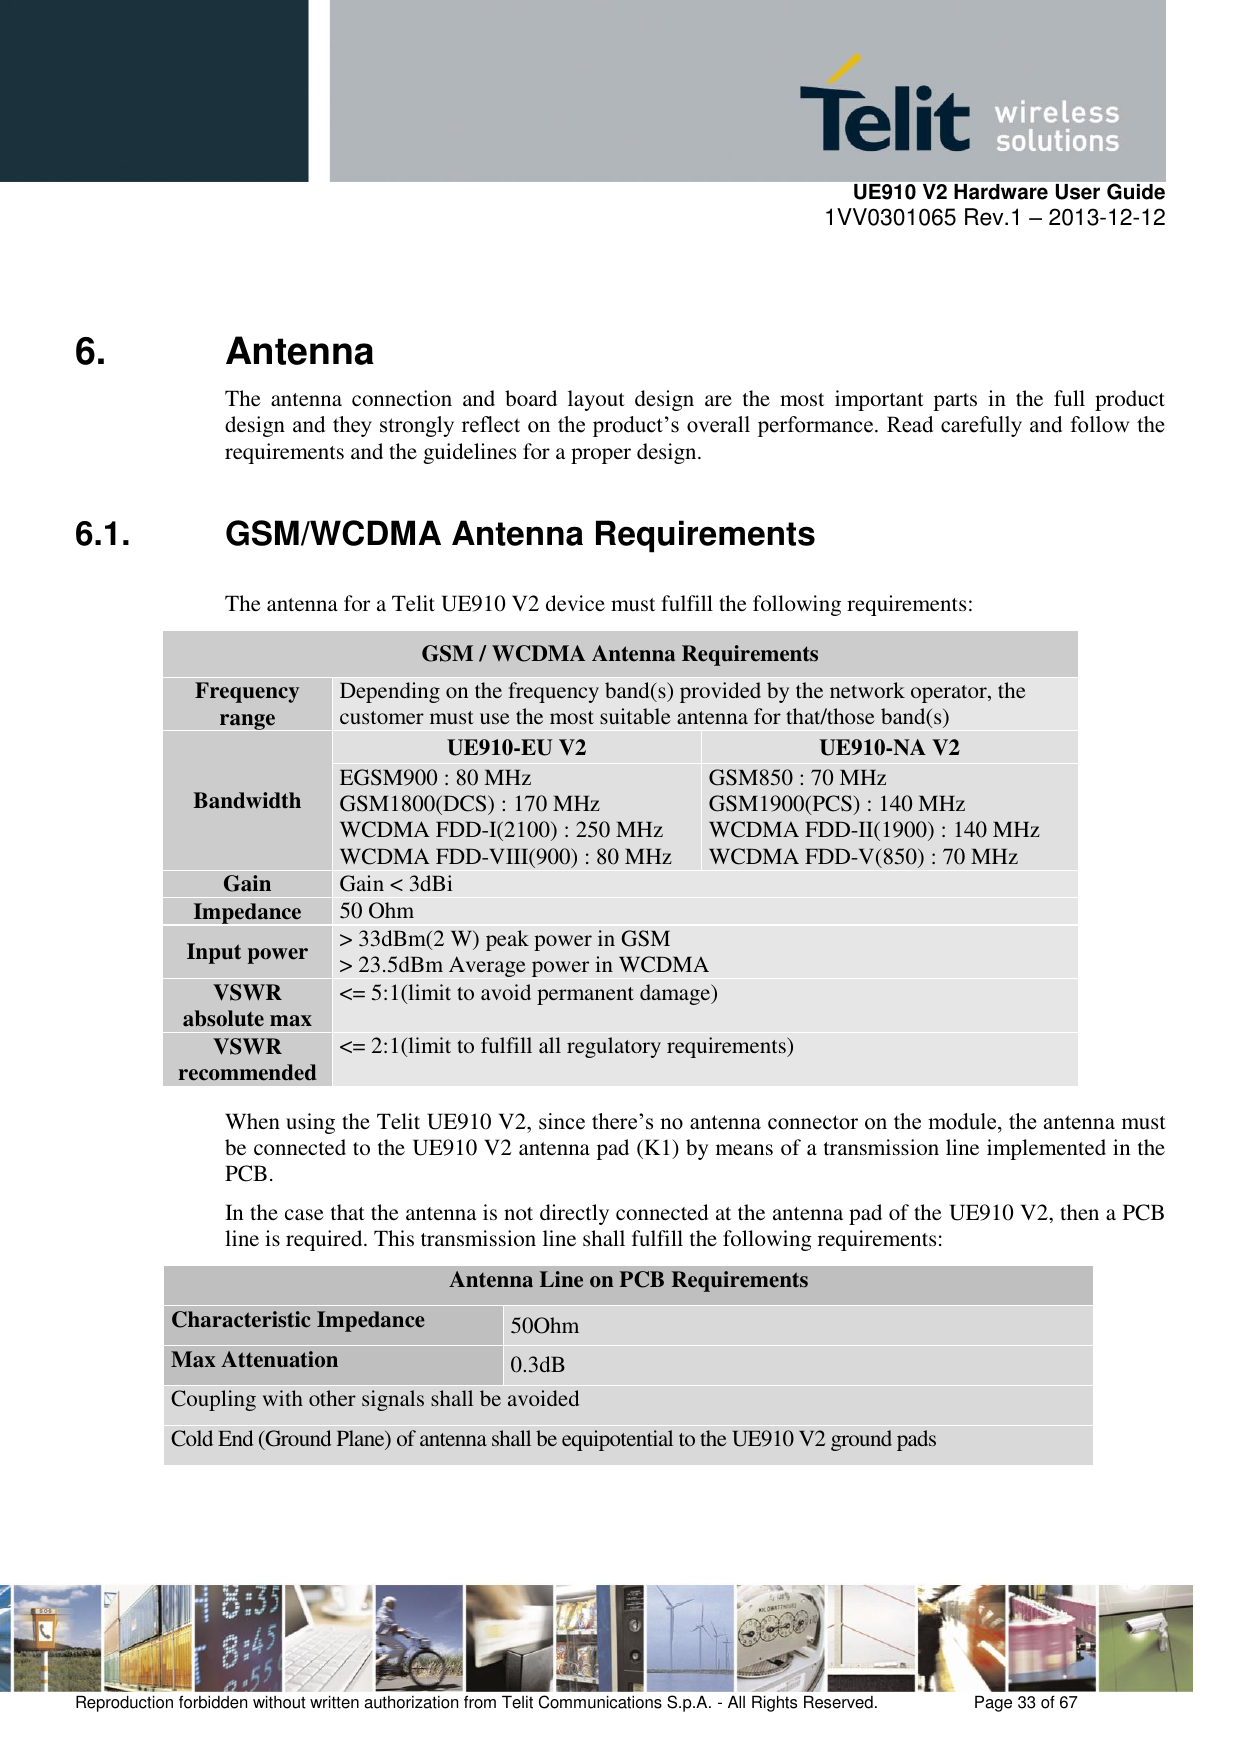     UE910 V2 Hardware User Guide 1VV0301065 Rev.1 – 2013-12-12  Reproduction forbidden without written authorization from Telit Communications S.p.A. - All Rights Reserved.    Page 33 of 67                                                     6.  Antenna  The  antenna  connection  and  board  layout  design  are  the  most  important  parts  in  the  full  product design and they strongly reflect on the product’s overall performance. Read carefully and follow the requirements and the guidelines for a proper design. 6.1.  GSM/WCDMA Antenna Requirements The antenna for a Telit UE910 V2 device must fulfill the following requirements:             When using the Telit UE910 V2, since there’s no antenna connector on the module, the antenna must be connected to the UE910 V2 antenna pad (K1) by means of a transmission line implemented in the PCB. In the case that the antenna is not directly connected at the antenna pad of the UE910 V2, then a PCB line is required. This transmission line shall fulfill the following requirements: Antenna Line on PCB Requirements Characteristic Impedance 50Ohm Max Attenuation 0.3dB Coupling with other signals shall be avoided Cold End (Ground Plane) of antenna shall be equipotential to the UE910 V2 ground pads  GSM / WCDMA Antenna Requirements Frequency range Depending on the frequency band(s) provided by the network operator, the customer must use the most suitable antenna for that/those band(s) Bandwidth UE910-EU V2 UE910-NA V2 EGSM900 : 80 MHz GSM1800(DCS) : 170 MHz WCDMA FDD-I(2100) : 250 MHz WCDMA FDD-VIII(900) : 80 MHz GSM850 : 70 MHz GSM1900(PCS) : 140 MHz WCDMA FDD-II(1900) : 140 MHz WCDMA FDD-V(850) : 70 MHz Gain Gain &lt; 3dBi Impedance 50 Ohm Input power &gt; 33dBm(2 W) peak power in GSM &gt; 23.5dBm Average power in WCDMA VSWR absolute max &lt;= 5:1(limit to avoid permanent damage) VSWR recommended &lt;= 2:1(limit to fulfill all regulatory requirements) 